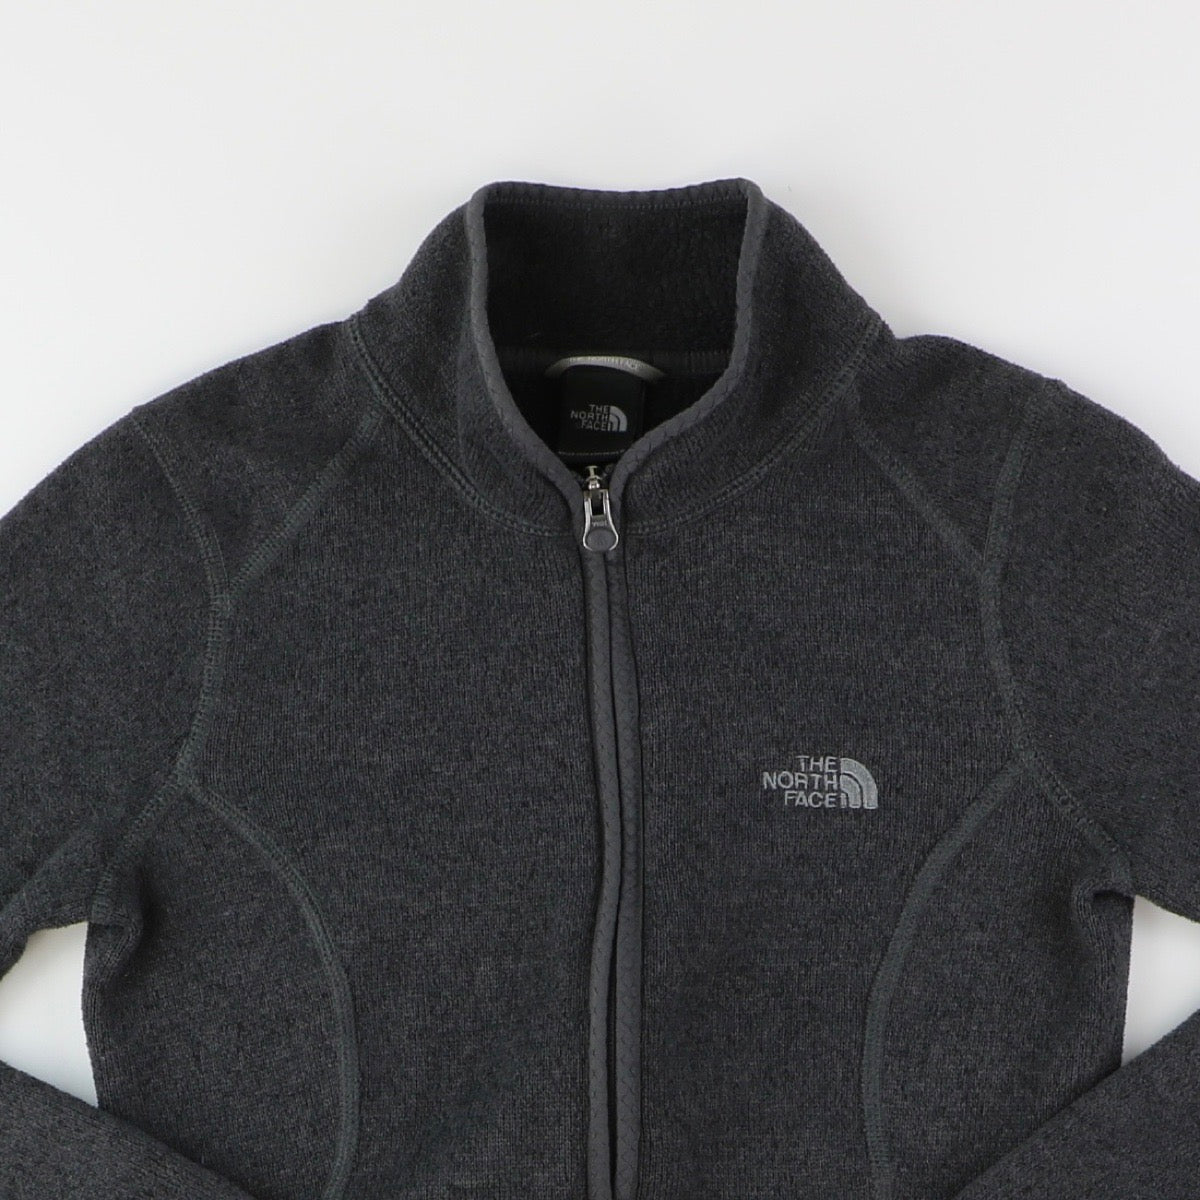 The North Face Zip Up (S)